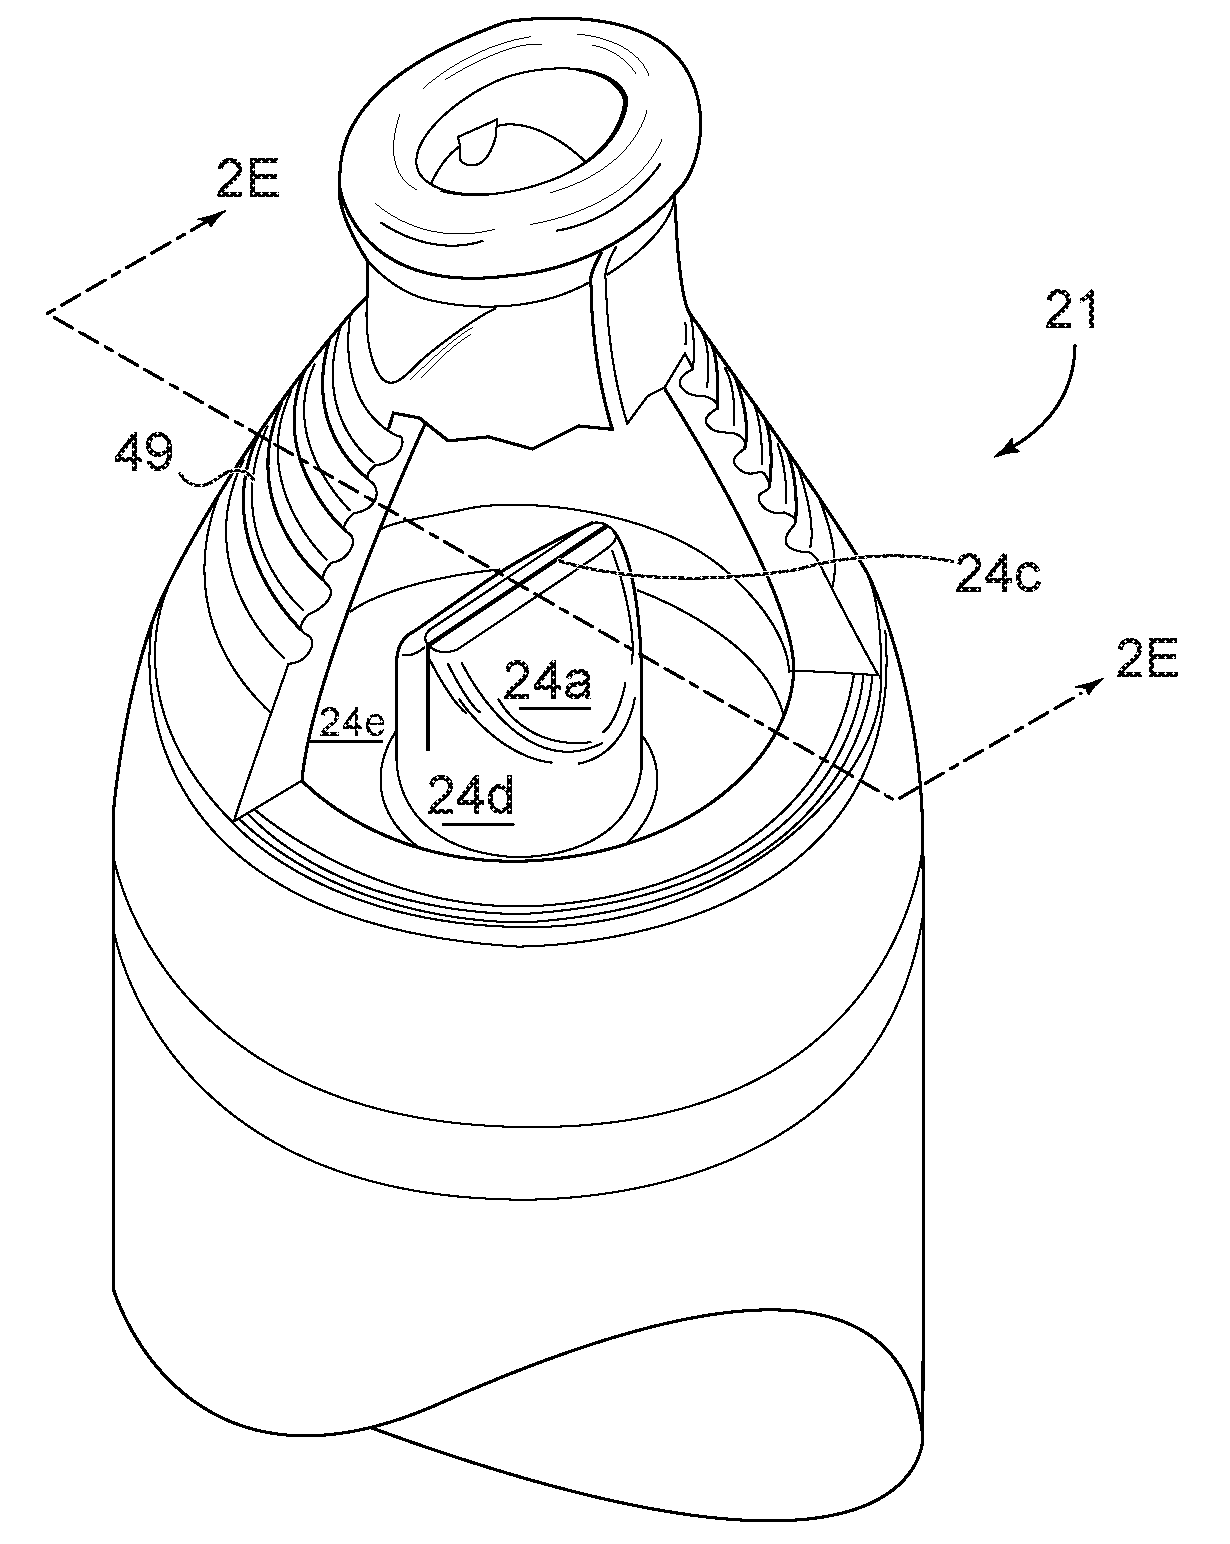 E-Cigarette with Valve Allowing Exhale Filter